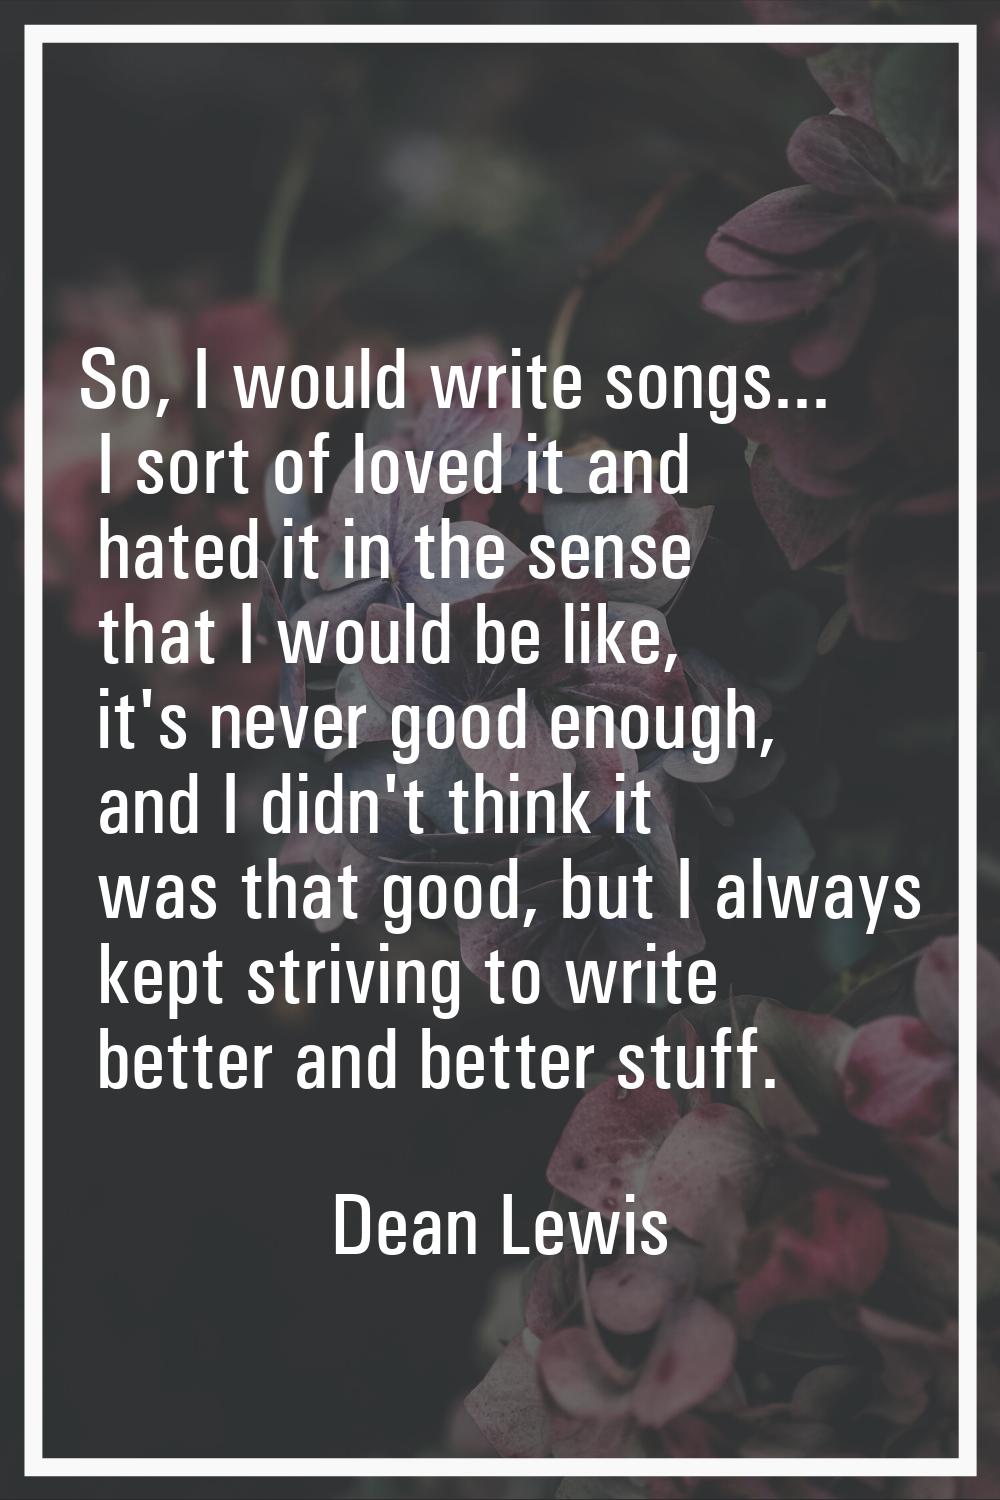 So, I would write songs... I sort of loved it and hated it in the sense that I would be like, it's 